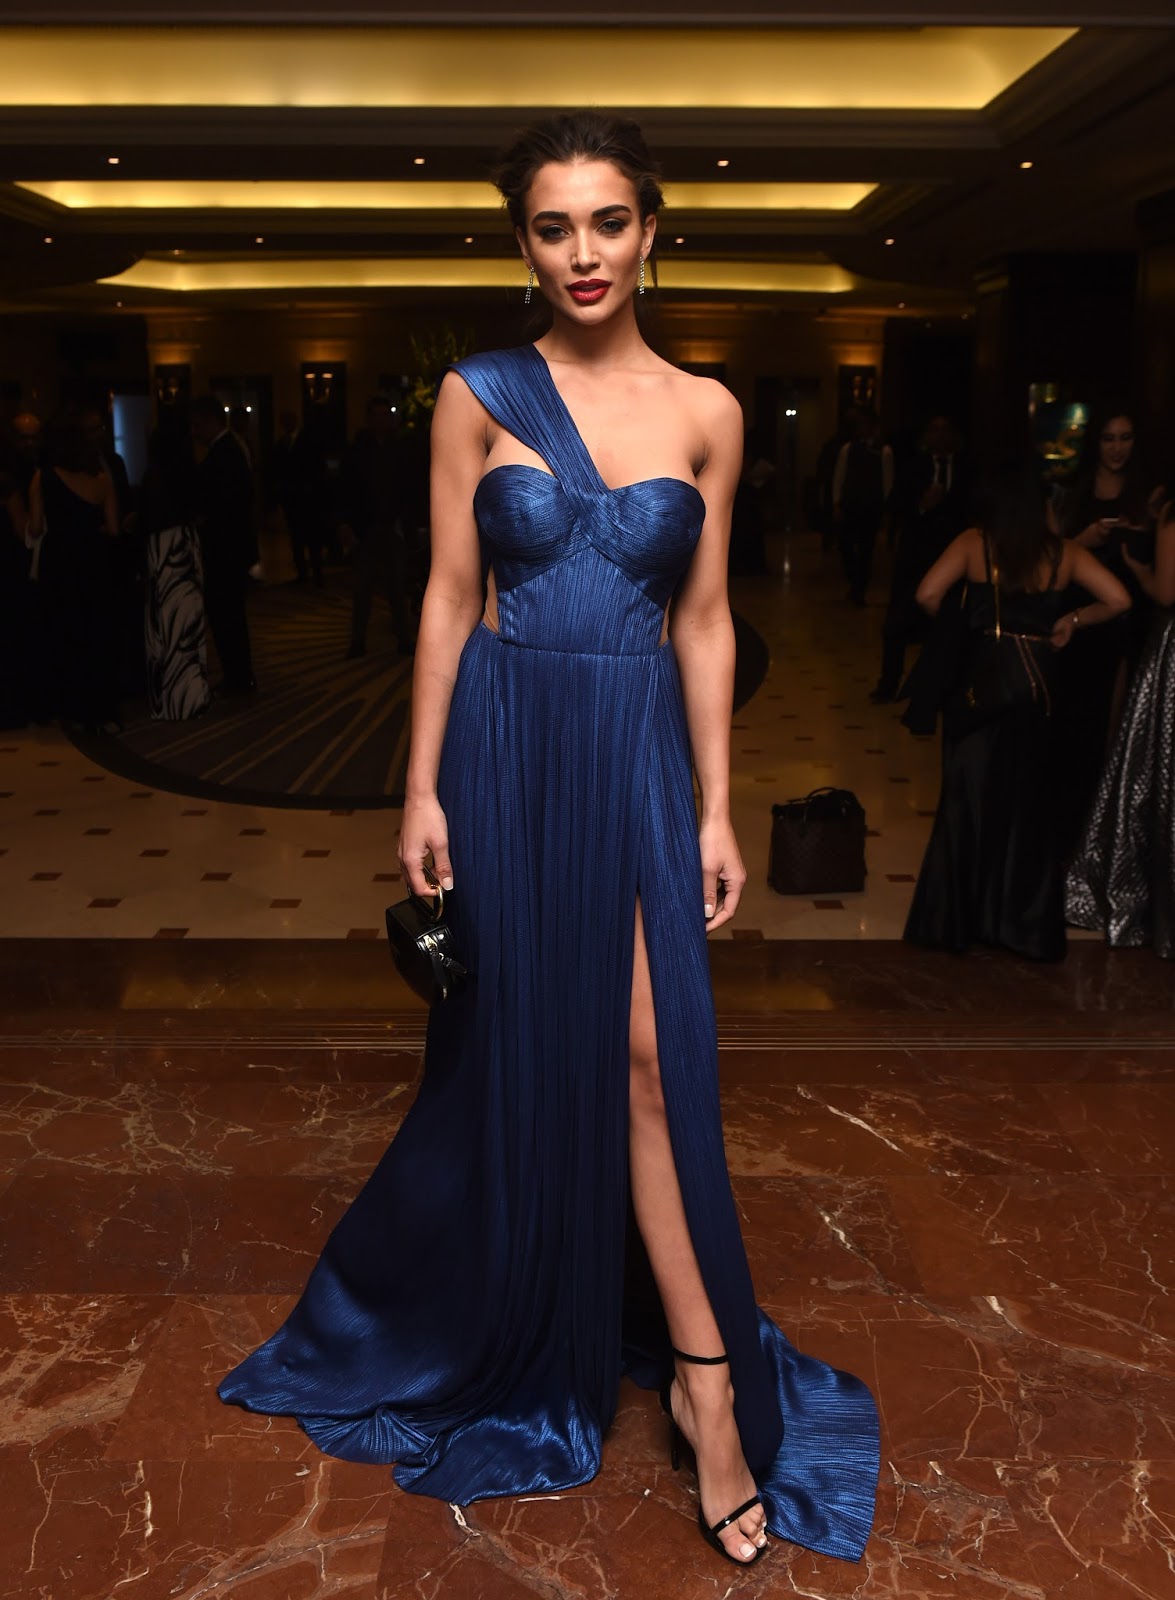 Amy Jackson Super Sexy Skin Show in a Blue Revealing Dress At The Asian Awards 2017 At The Hilton Park Lane in London